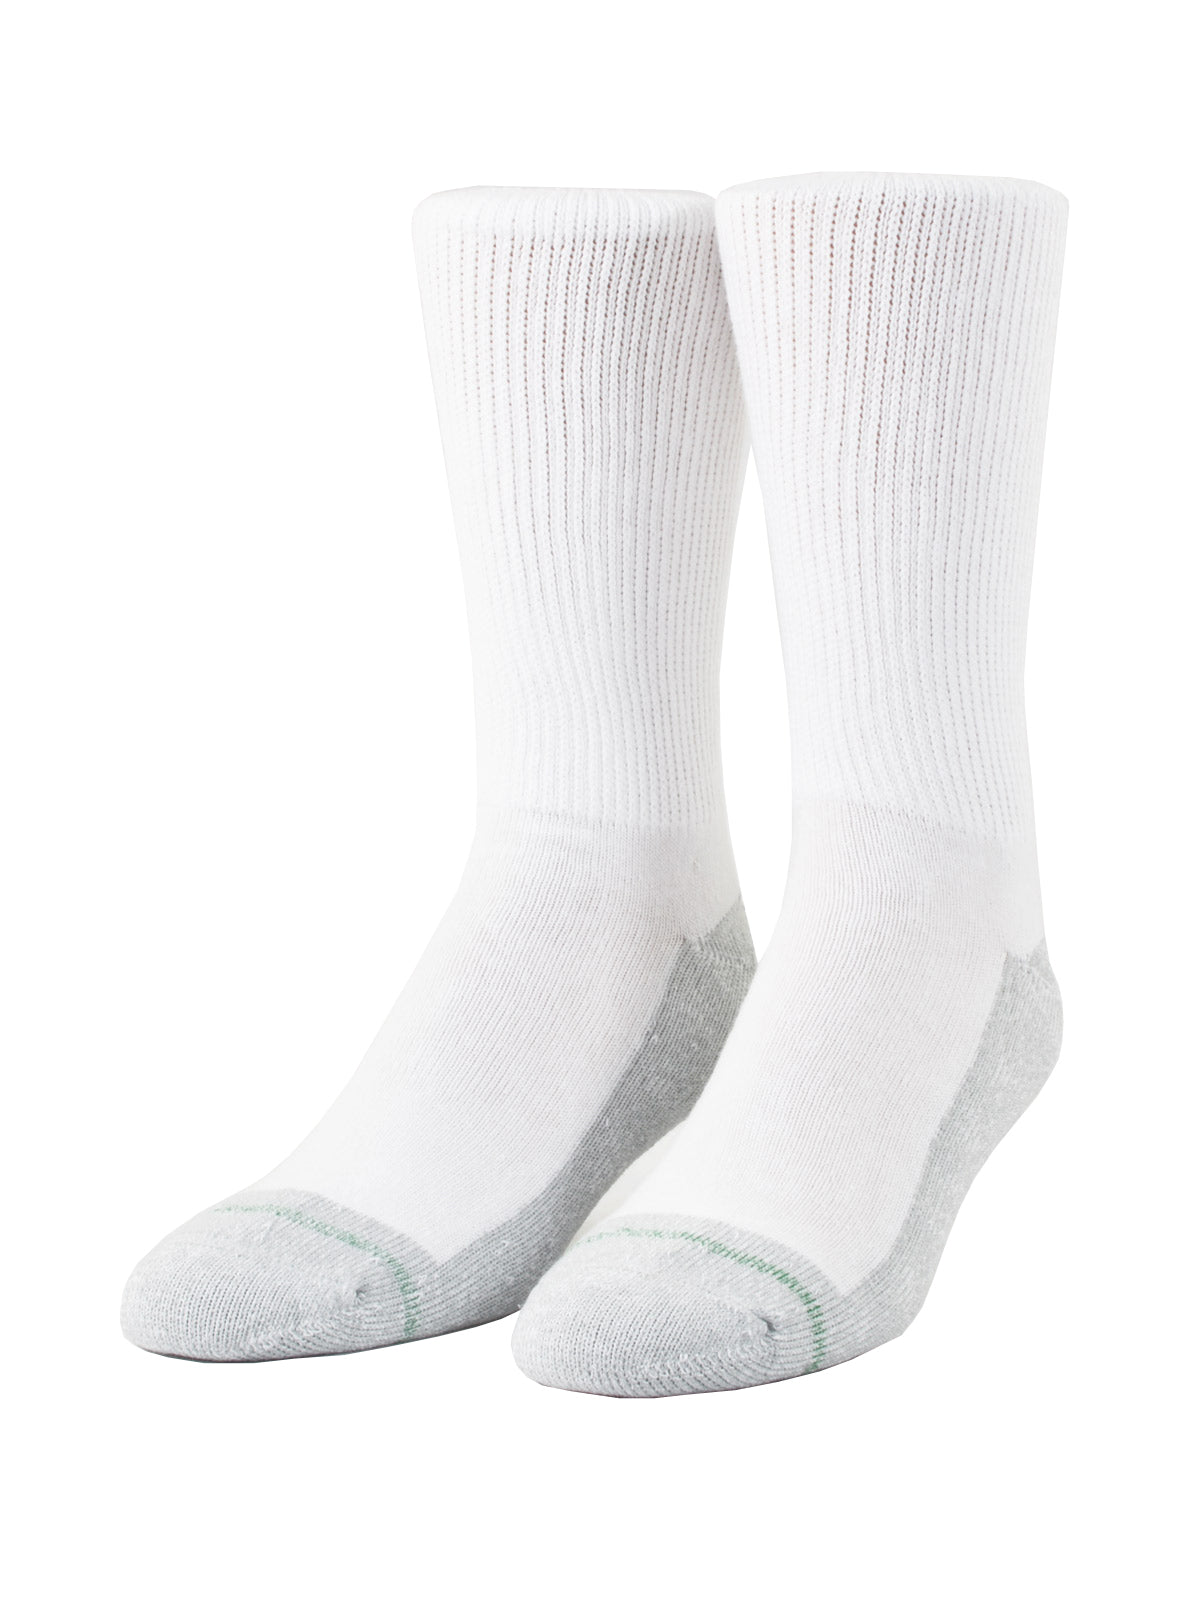 Loose Fit Stays Up Cotton Casual Quarter Socks White / Large